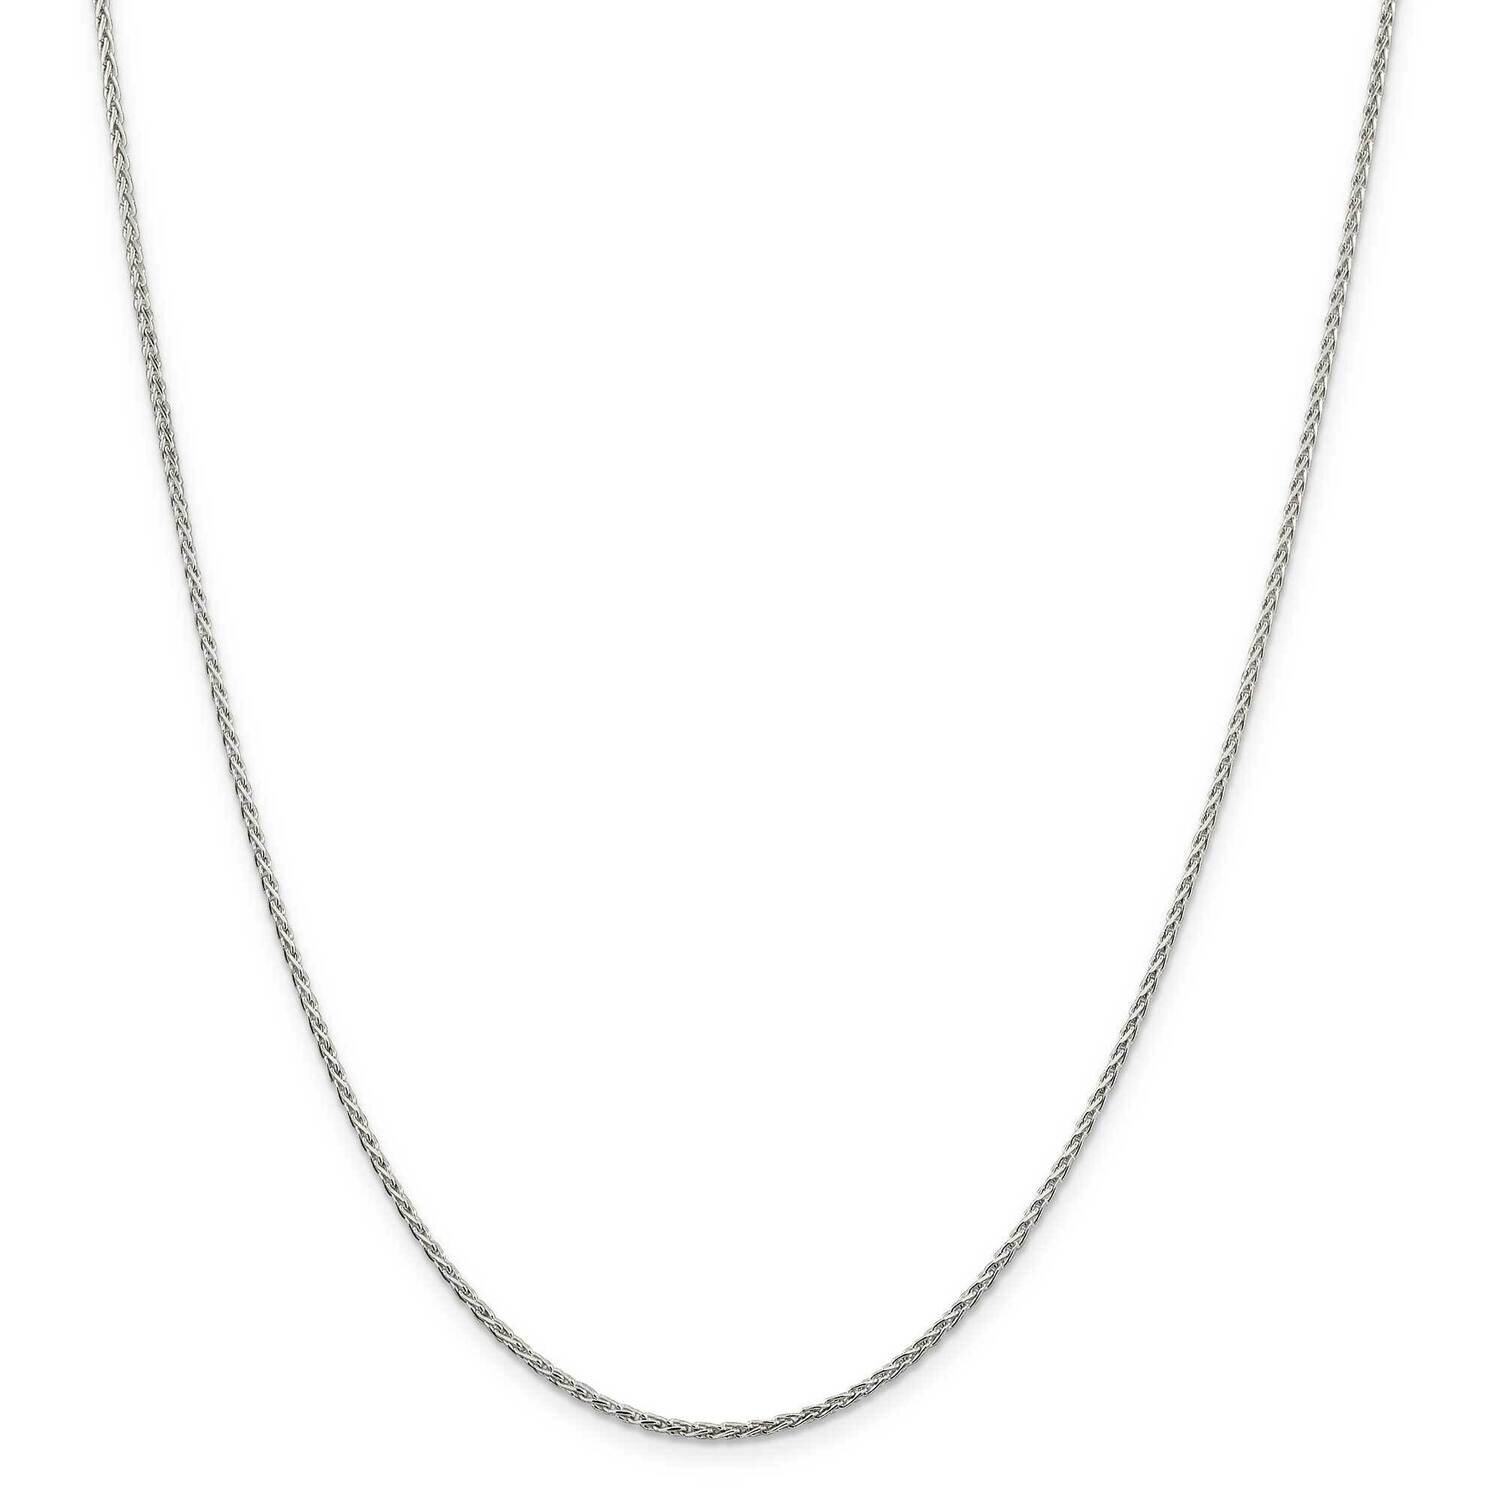 1.5mm Diamond-Cut Spiga Chain with 4 Inch Extender 22 Inch Sterling Silver QDS045E-22